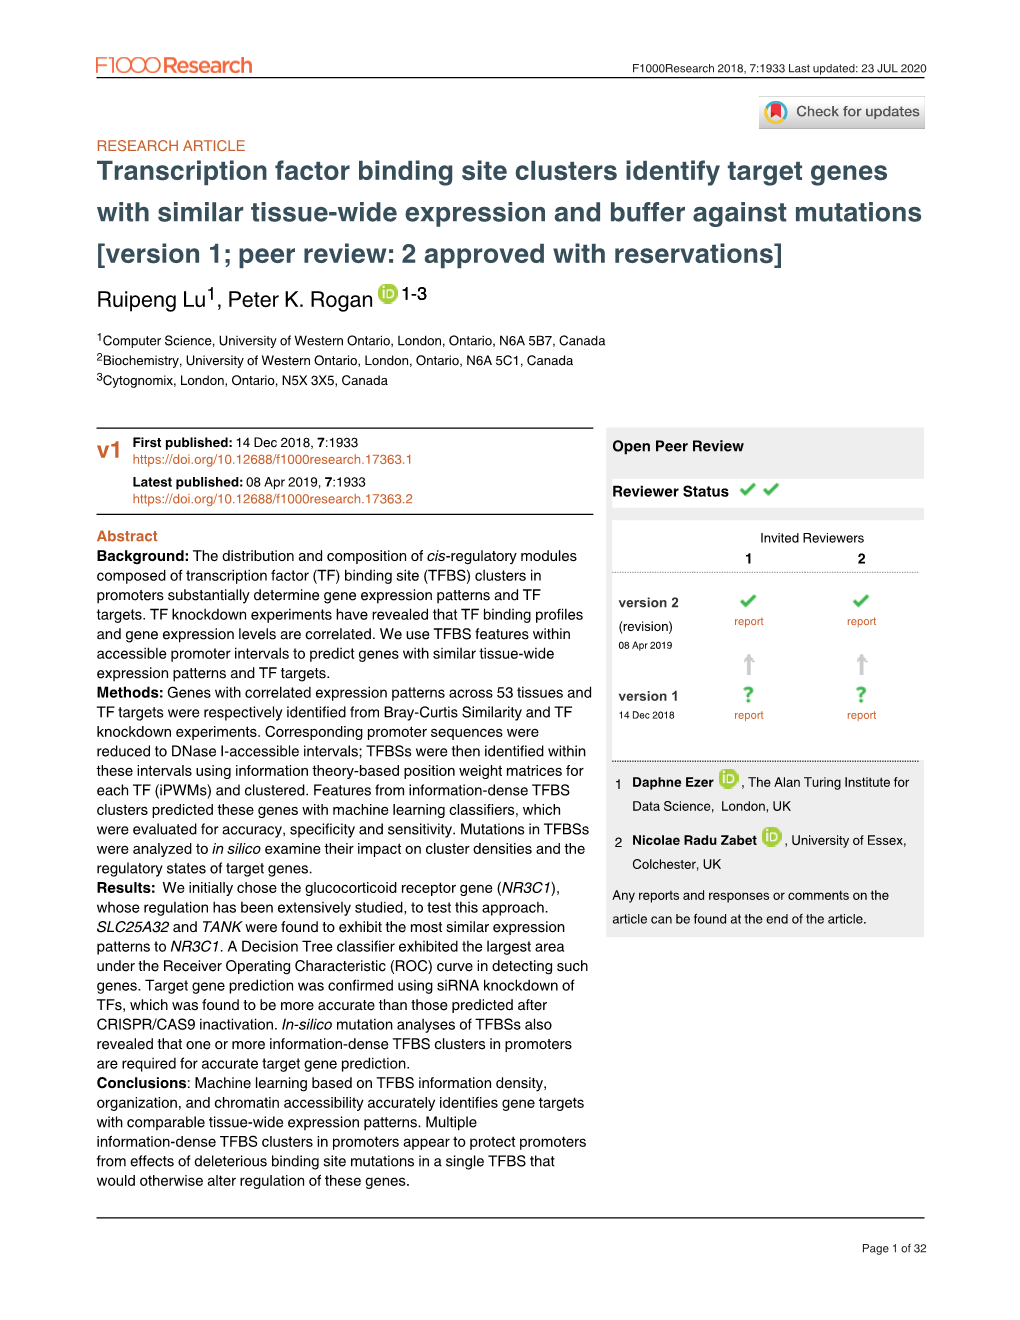 Transcription Factor Binding Site Clusters Identify Target Genes With